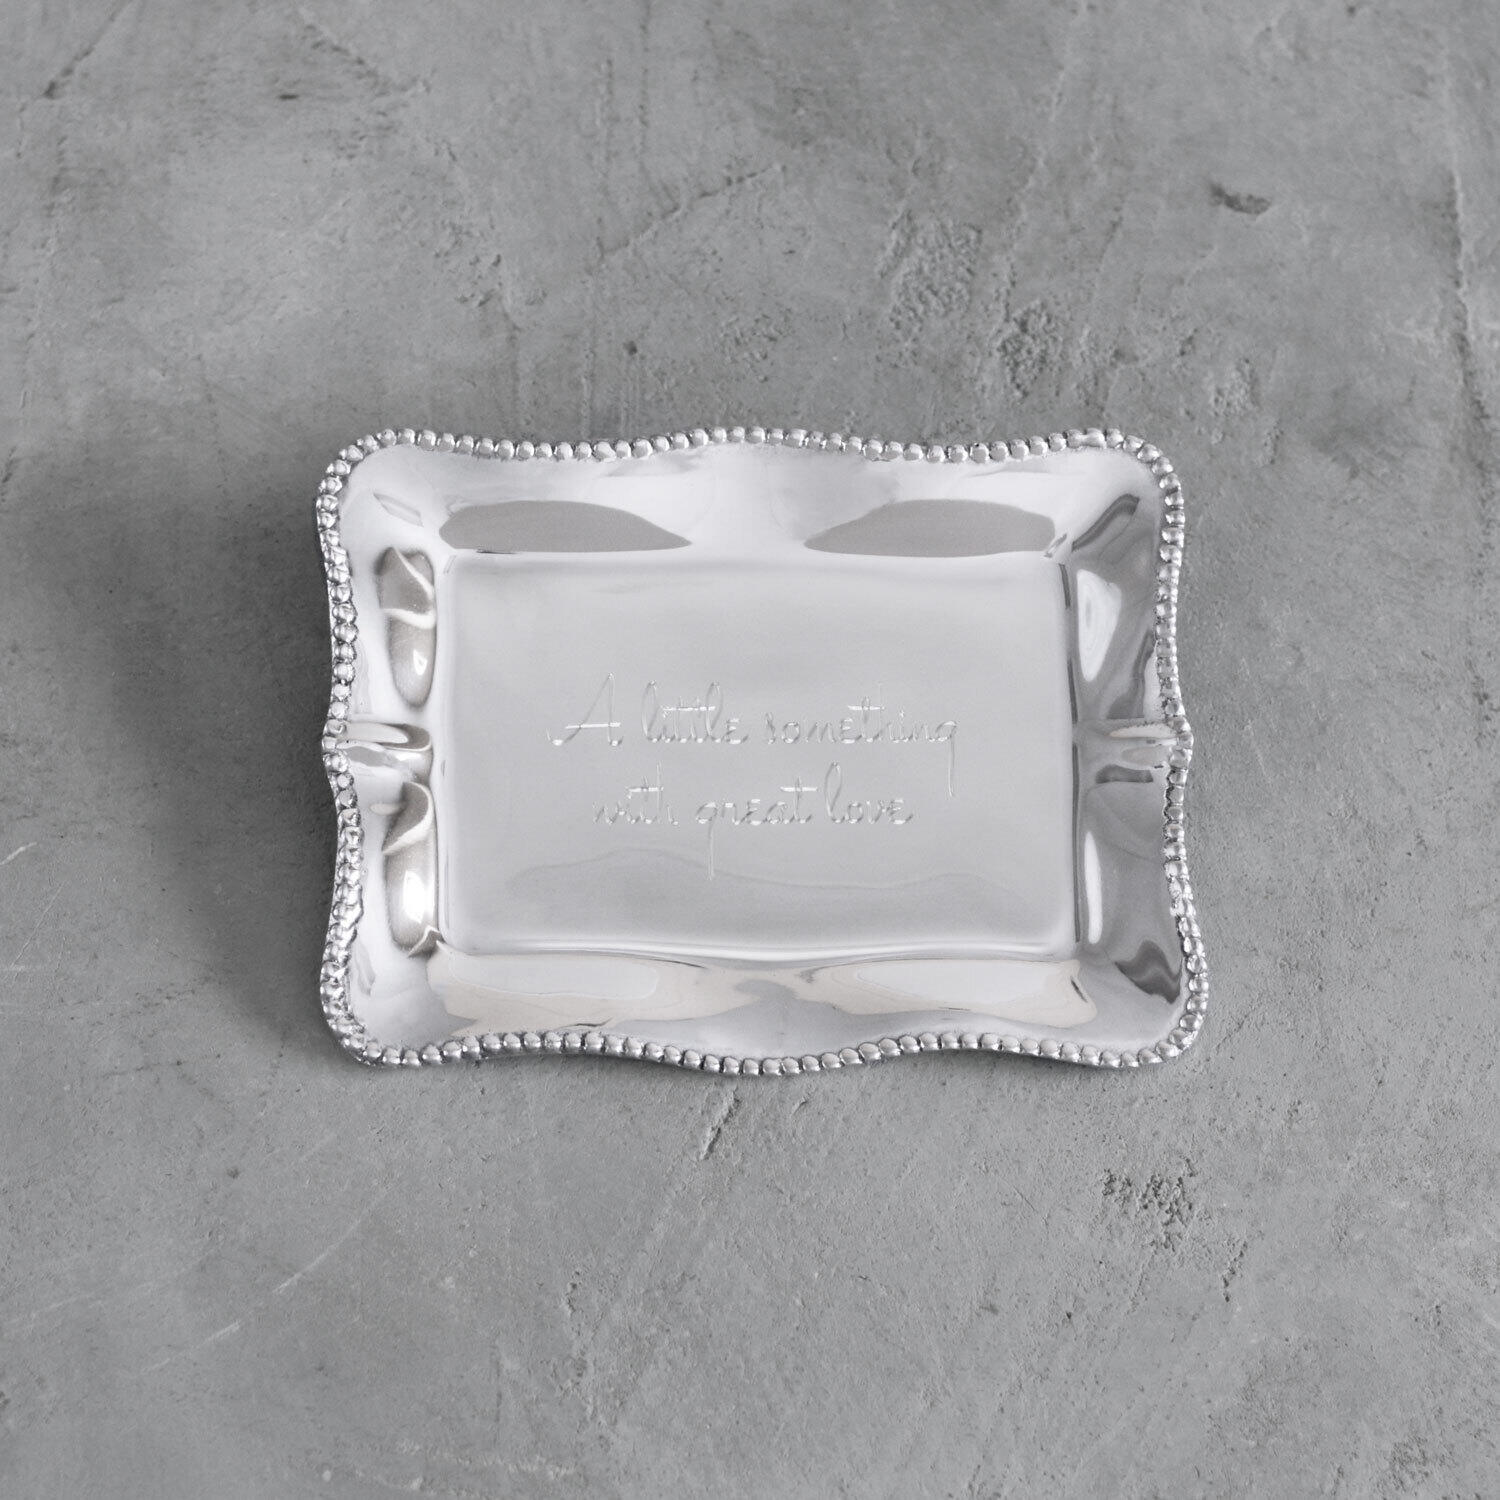 GIFTABLES Pearl Denisse Rectangular Engraved Tray &quot;A little something with great love&quot;